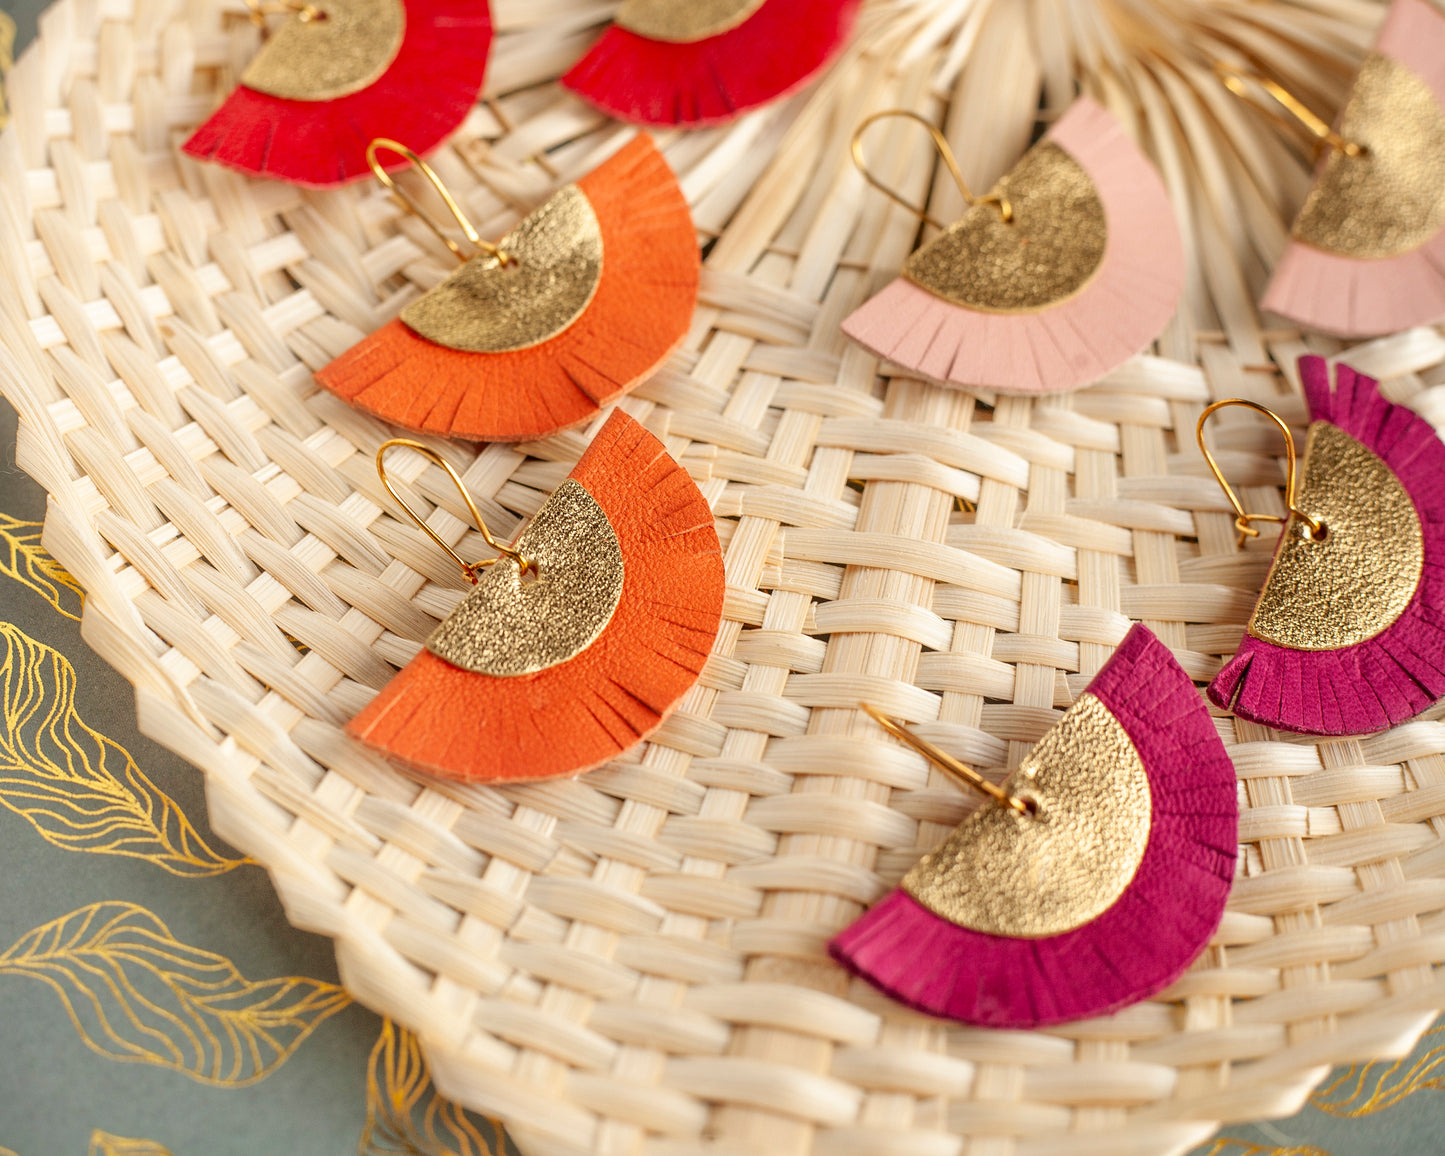 Half-circle fringed earrings in orange and gold leather